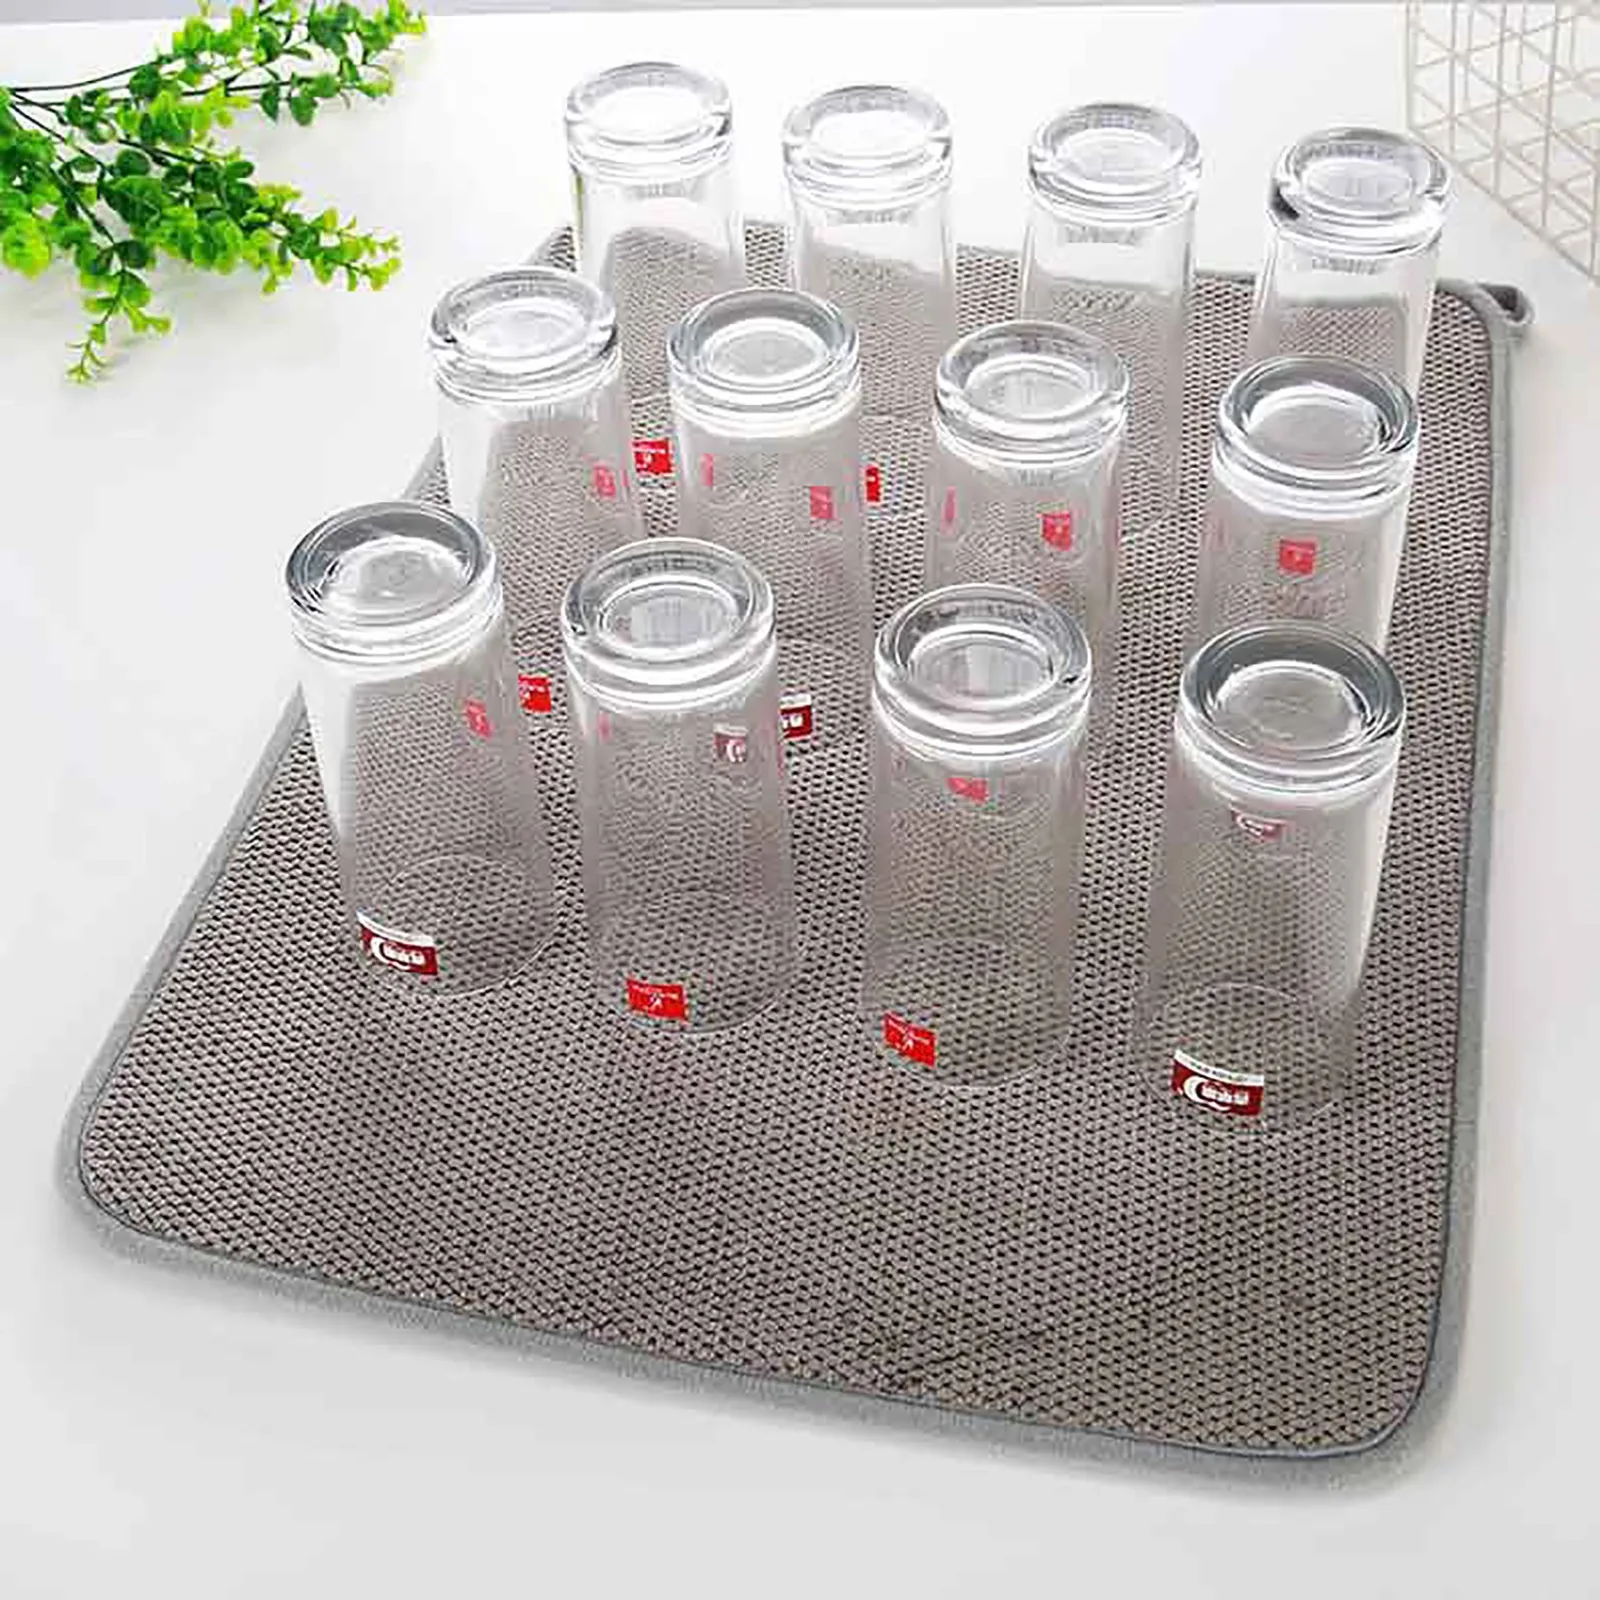 https://ae01.alicdn.com/kf/S4849490c8c234407810ade877857aa30r/2Pcs-Dish-Drying-Mat-Absorbent-Microfiber-Dishes-Drainer-Mats-For-Kitchen-Counter-Large-Size-14-96.jpg